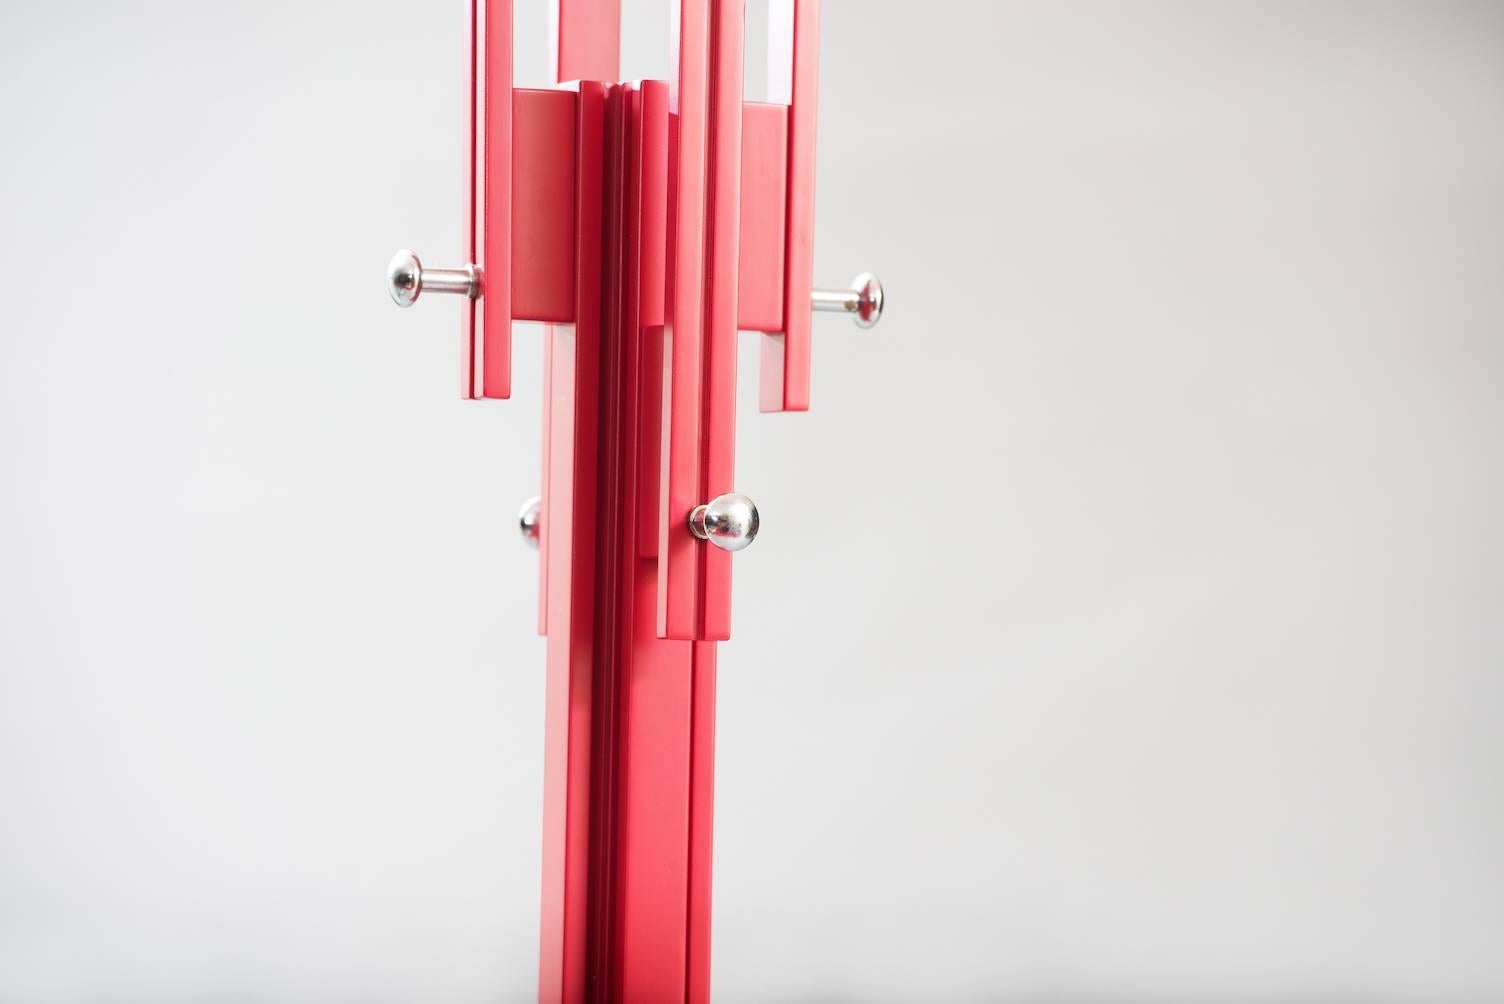 Red lacquered wood and chrome coat rack.
Measures: H. 183 cm, 34 x 34 cm (base)
Producer: Fiarm.